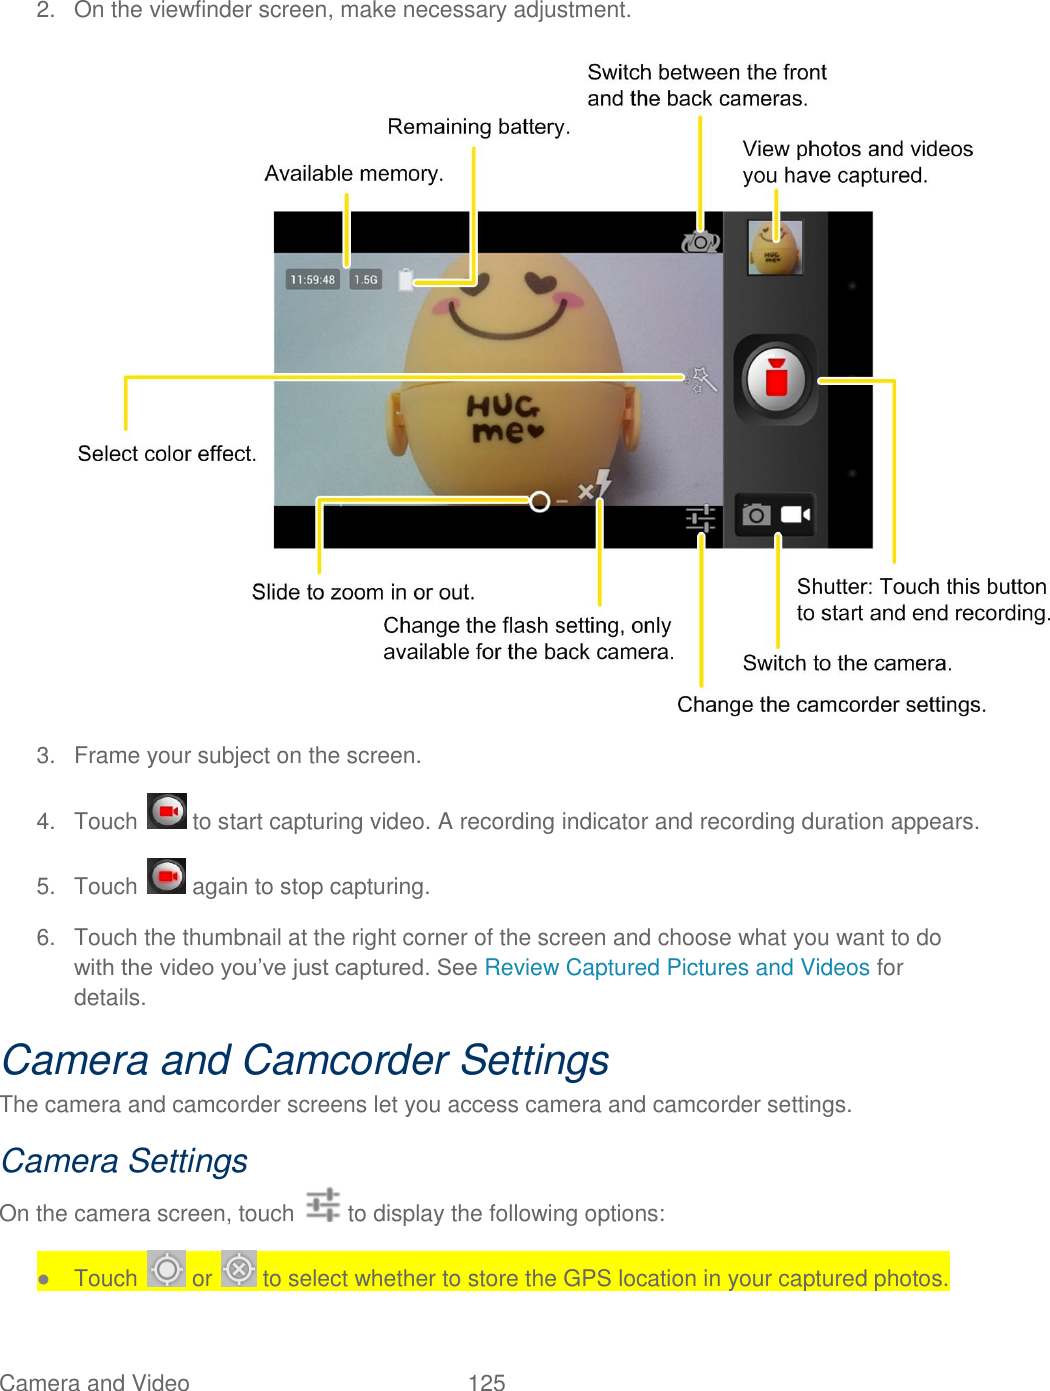 Camera and Video  125   2.  On the viewfinder screen, make necessary adjustment.   3.  Frame your subject on the screen. 4.  Touch   to start capturing video. A recording indicator and recording duration appears. 5.  Touch   again to stop capturing. 6.  Touch the thumbnail at the right corner of the screen and choose what you want to do with the video you‟ve just captured. See Review Captured Pictures and Videos for details. Camera and Camcorder Settings The camera and camcorder screens let you access camera and camcorder settings. Camera Settings On the camera screen, touch   to display the following options: ● Touch   or   to select whether to store the GPS location in your captured photos. 